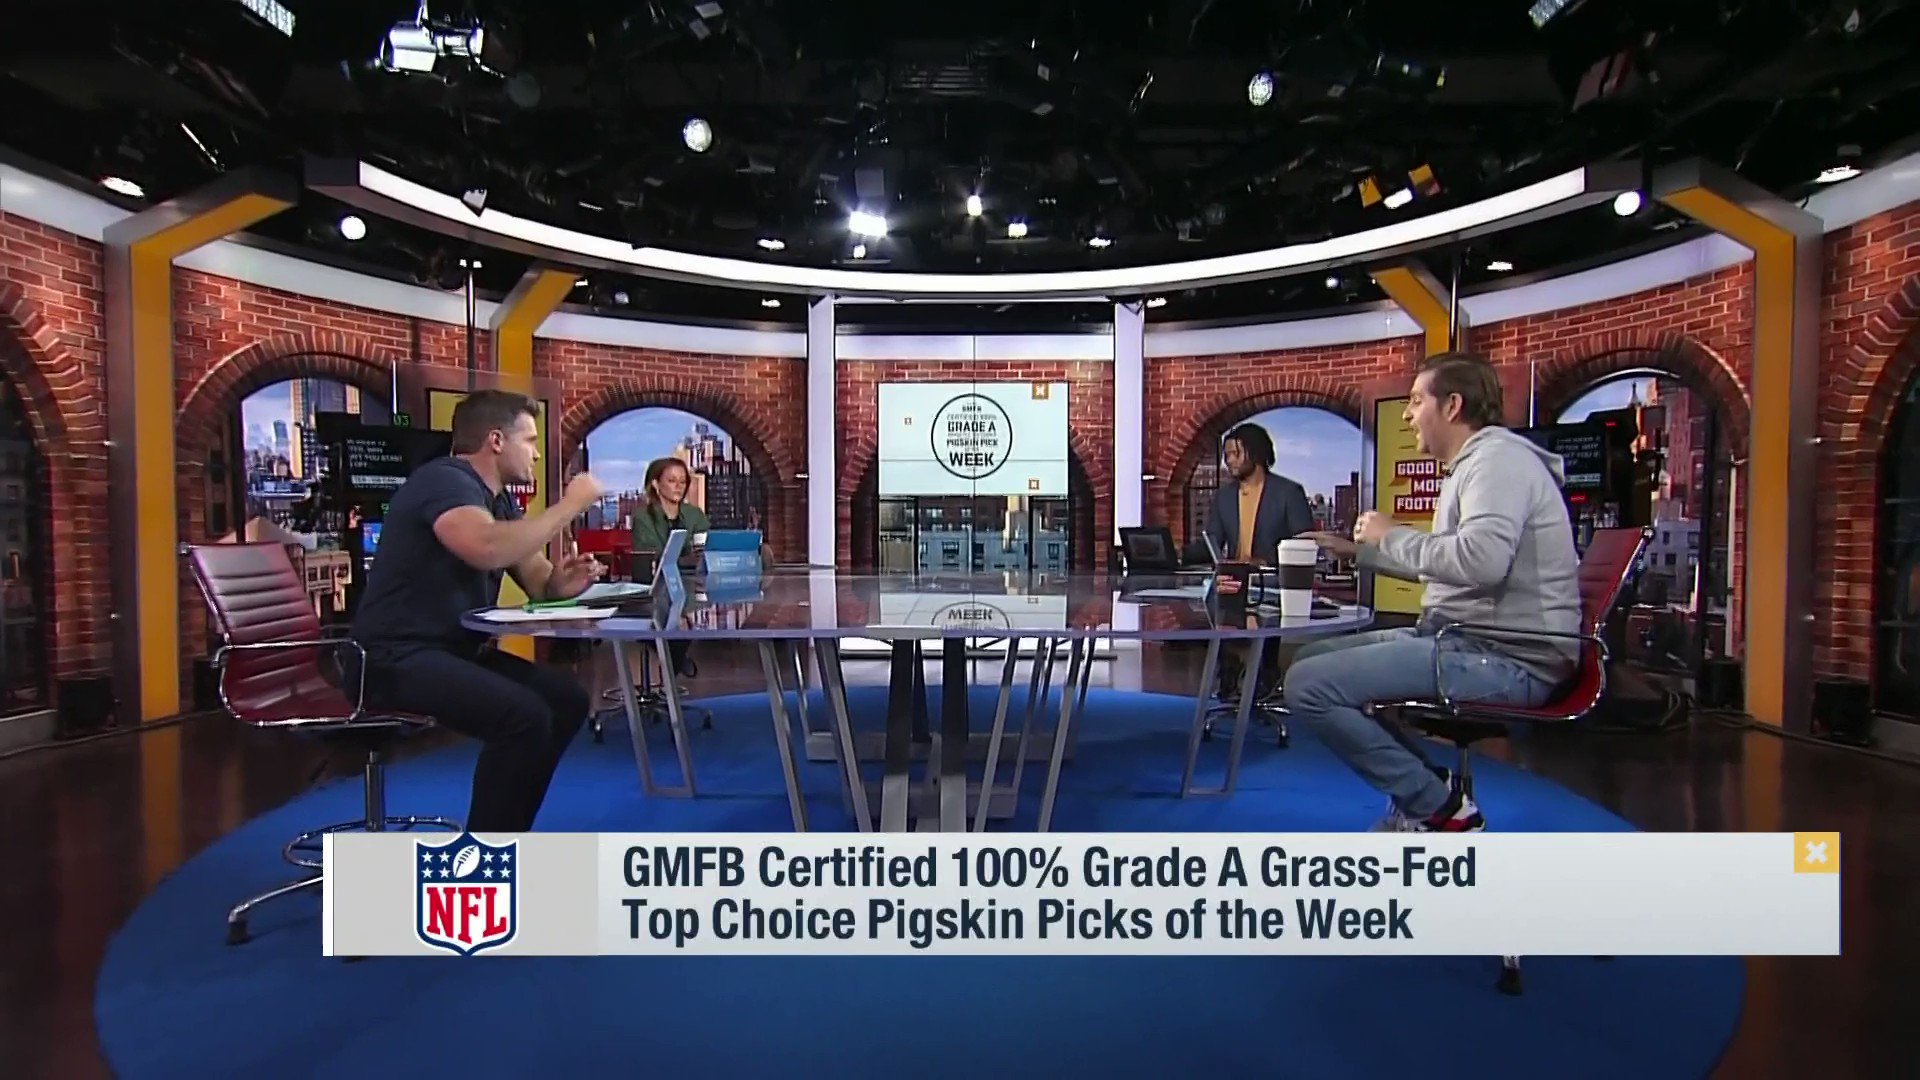 Good Morning Football on X: 'We've got your GMFB Certified 100% Grade A  Grass-Fed Top Choice Pigskin Picks of the Week 